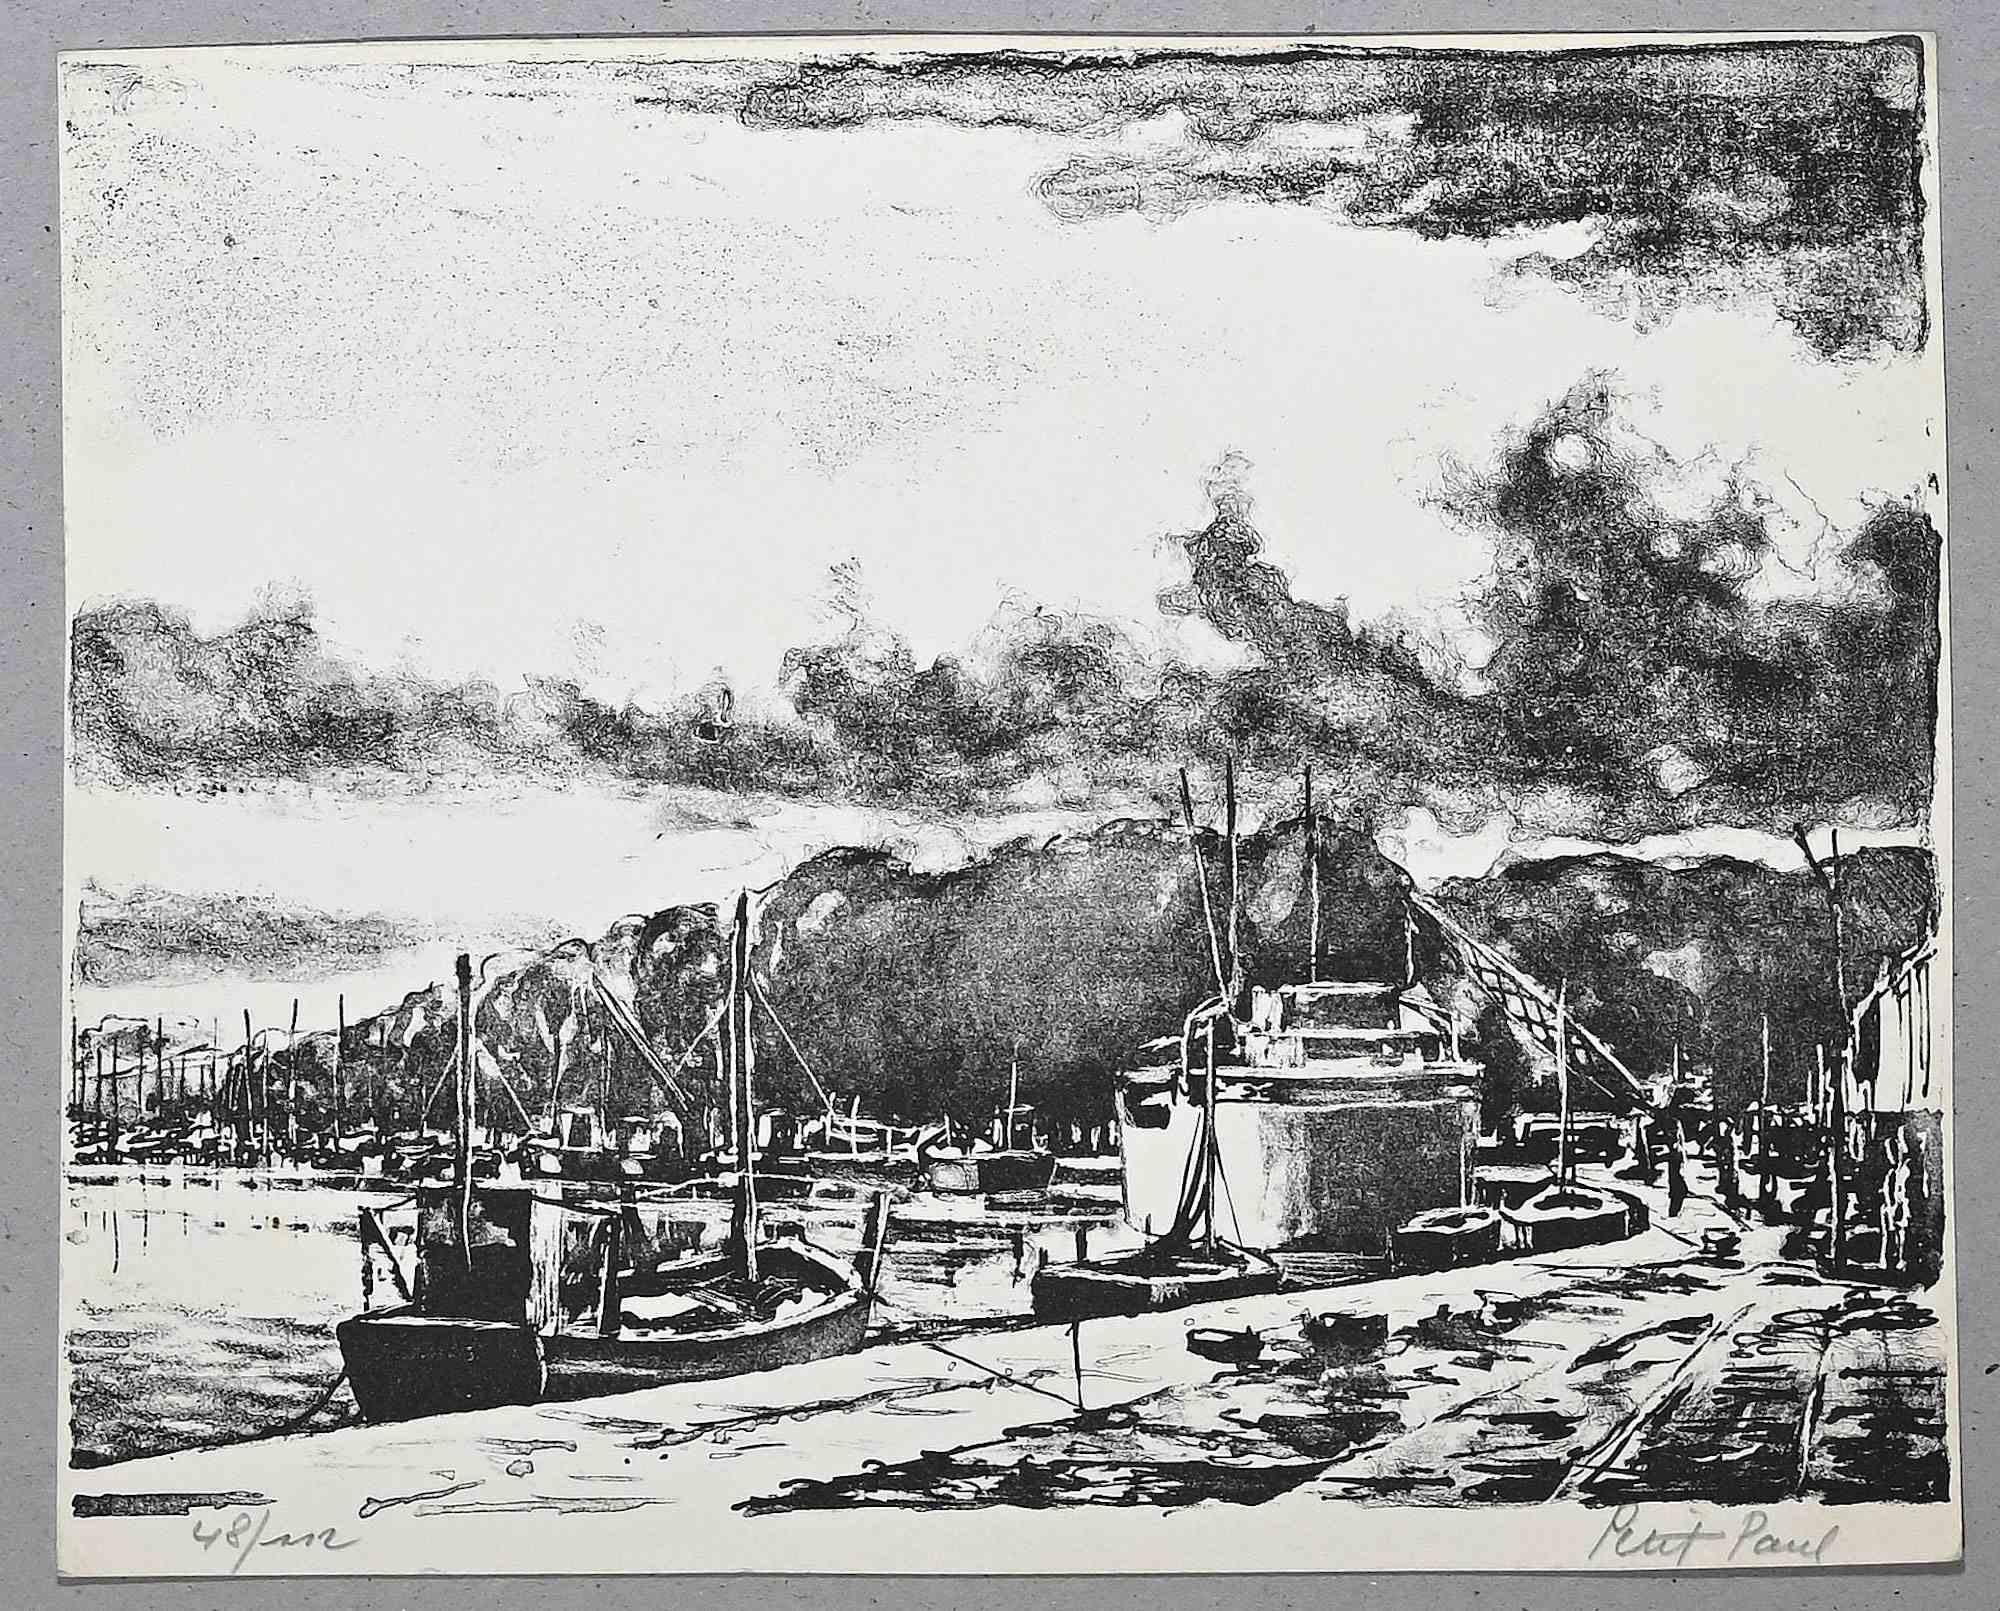 The Harbor is an original lithograph realized by Paul Petit in the mid-20th Century.

Hand-signed.

Numbered, 48/112

The artwork is depicted through confident strokes in a well-balanced composition.